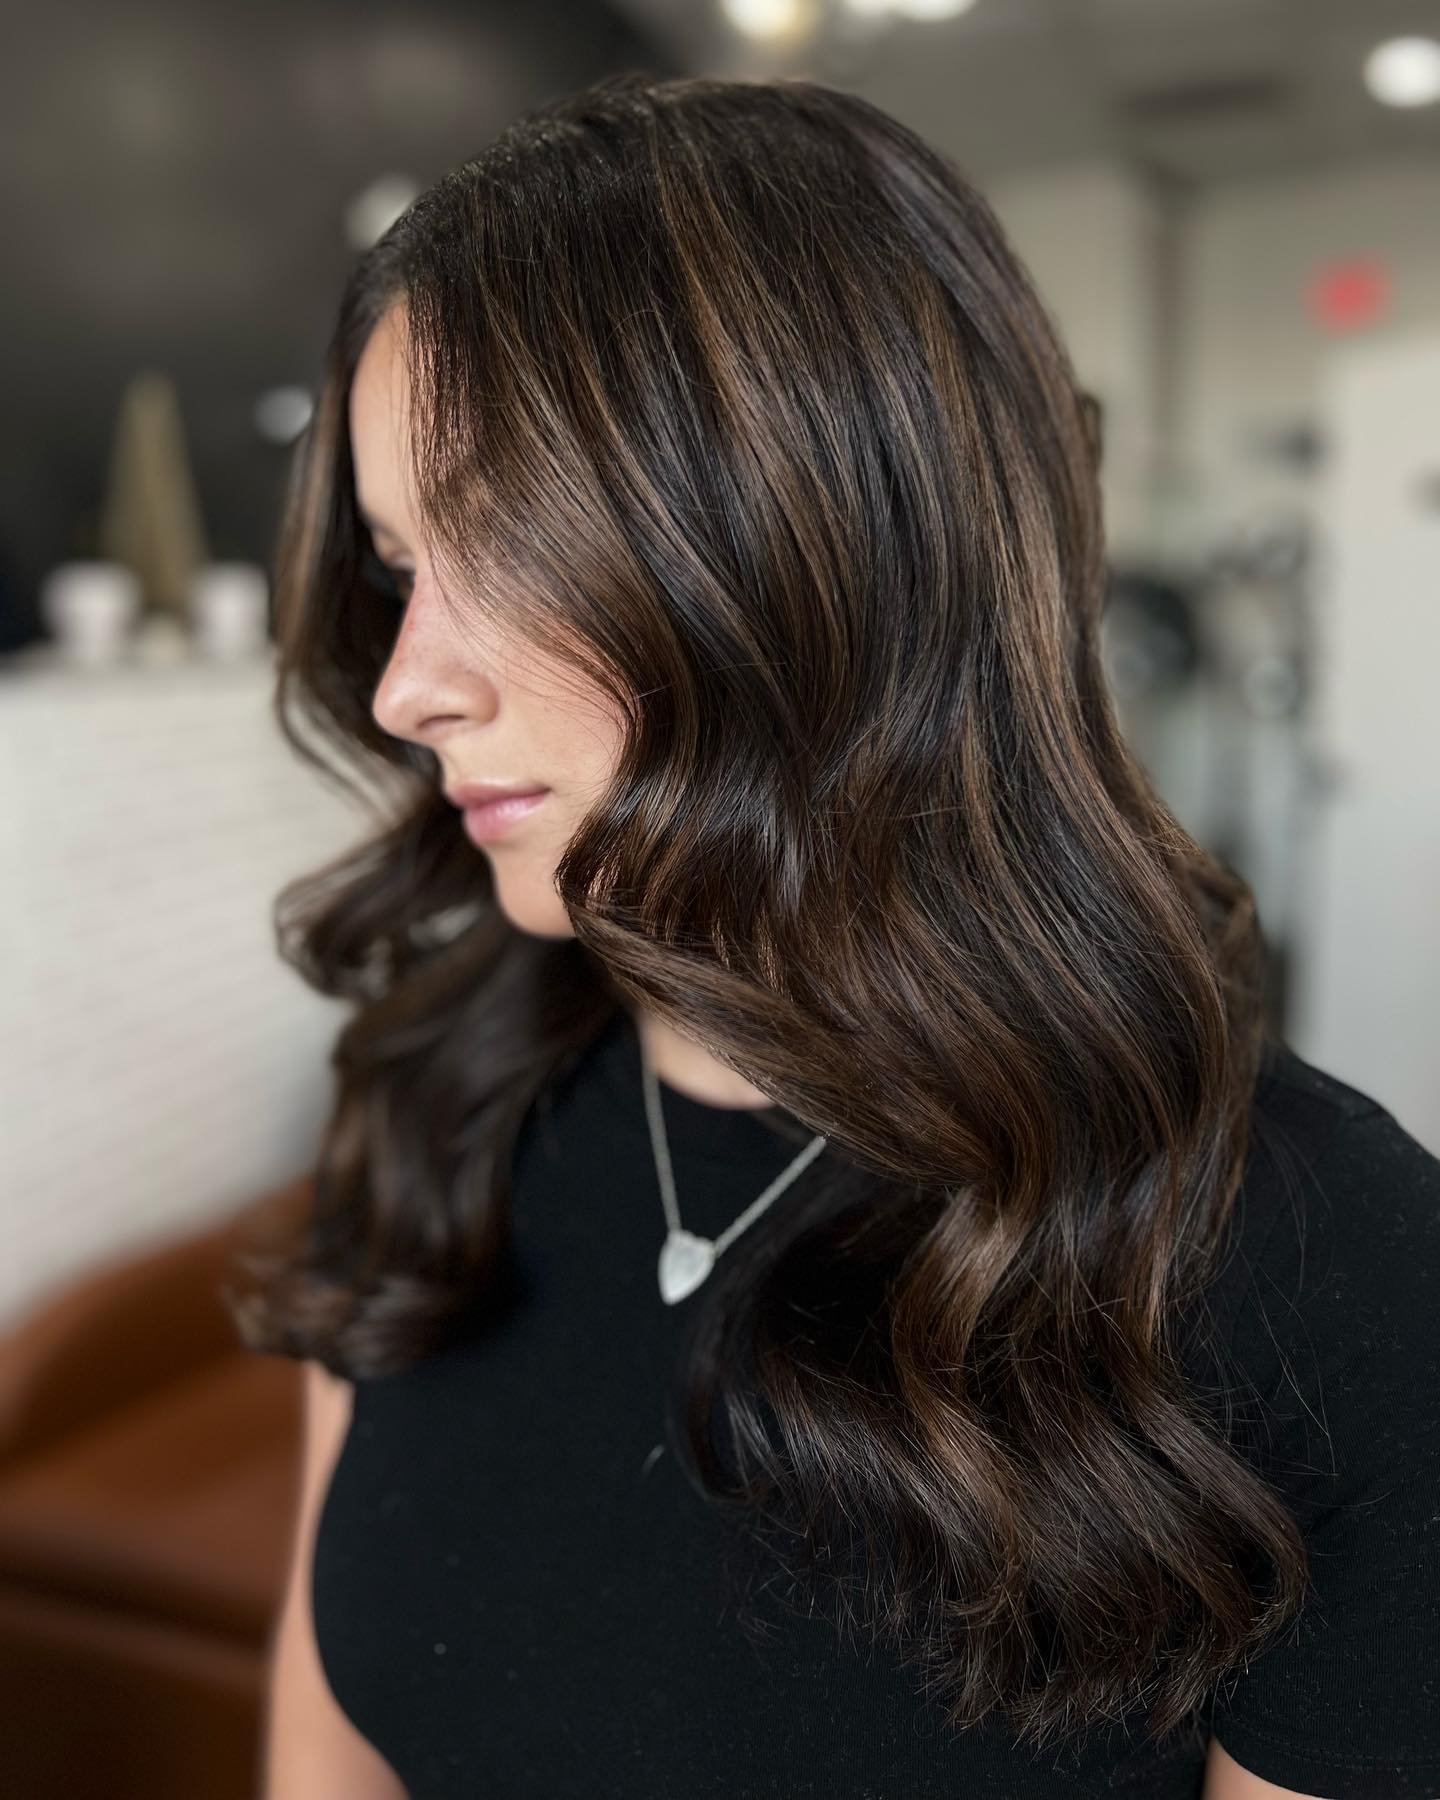 We thought blondes had more fun until @navisionbeauty took this &bull; BRUNETTE BEAUTY &bull; to the next level.✨💋👑

Get your summer appointments booked, #LuxeQueens! Hot girl summer looks amazing on you. #LuxeLabStudio #HairInspiration #BrunetteBa